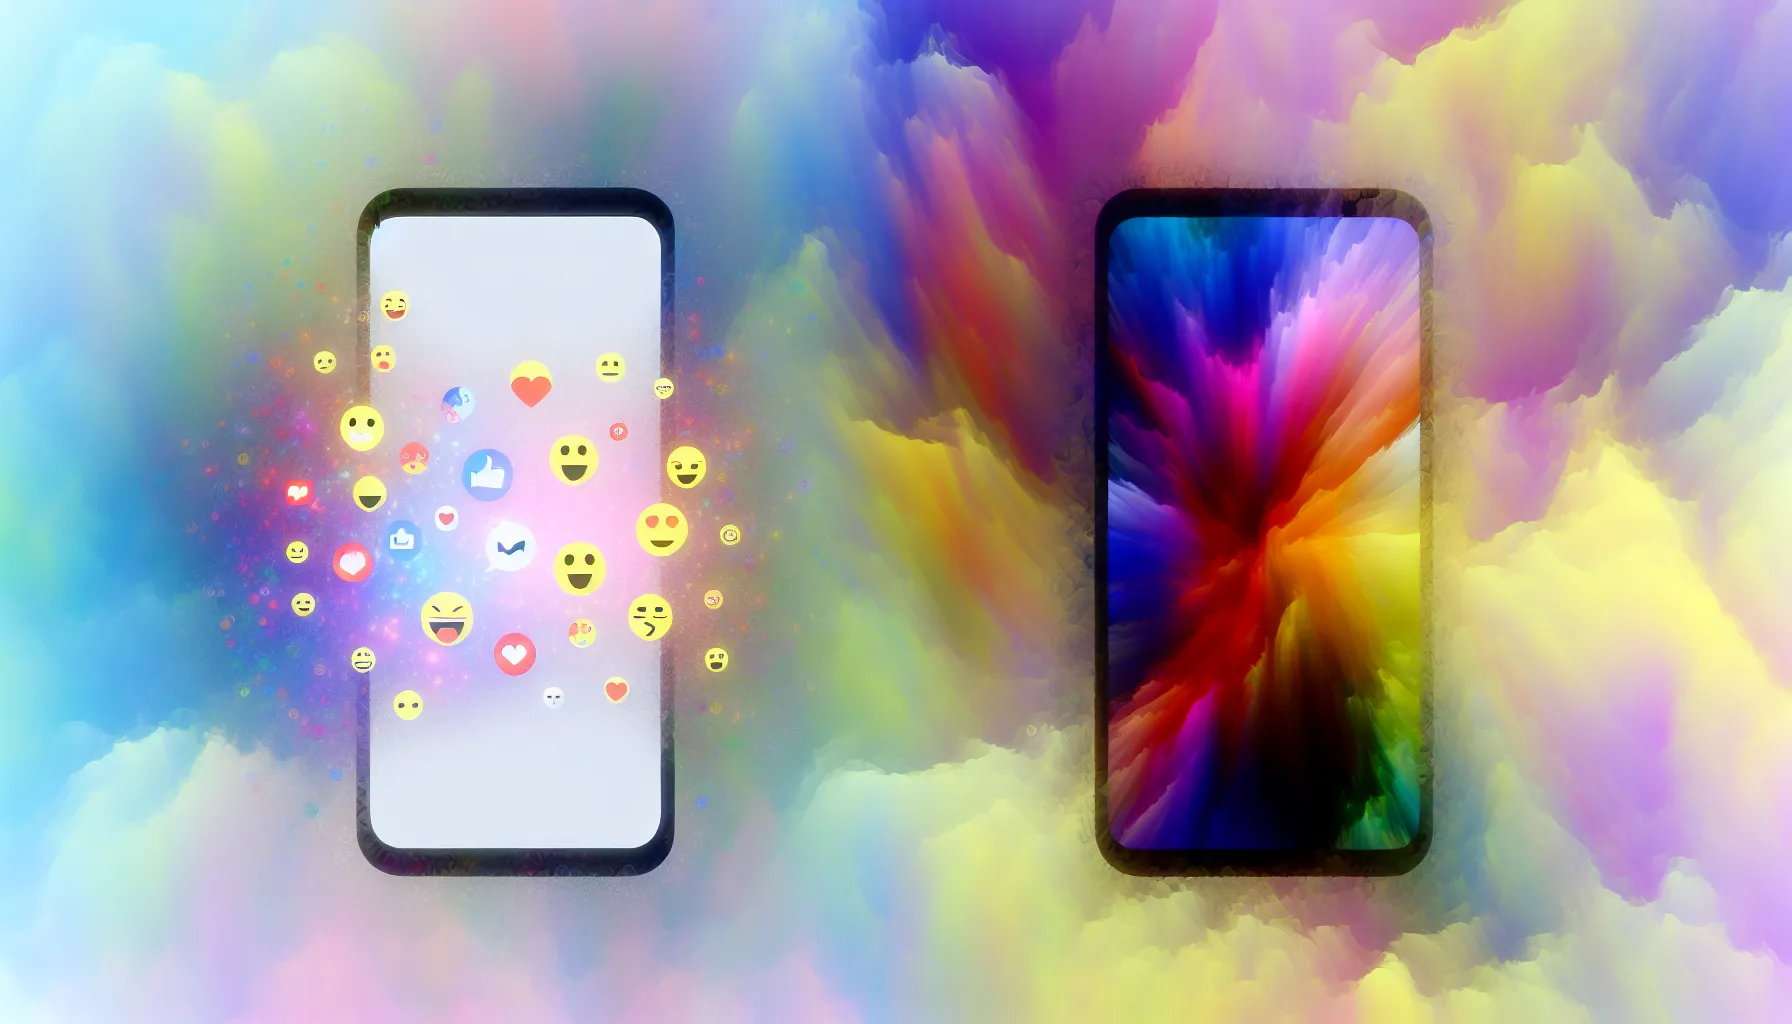 <strong>Communicating in Colors:</strong> The juxtaposition of an emoji-filled screen and its minimalist counterpart reflects the balance we seek in digital dialogues—a reminder that the weight of words is often found in their scarcity.